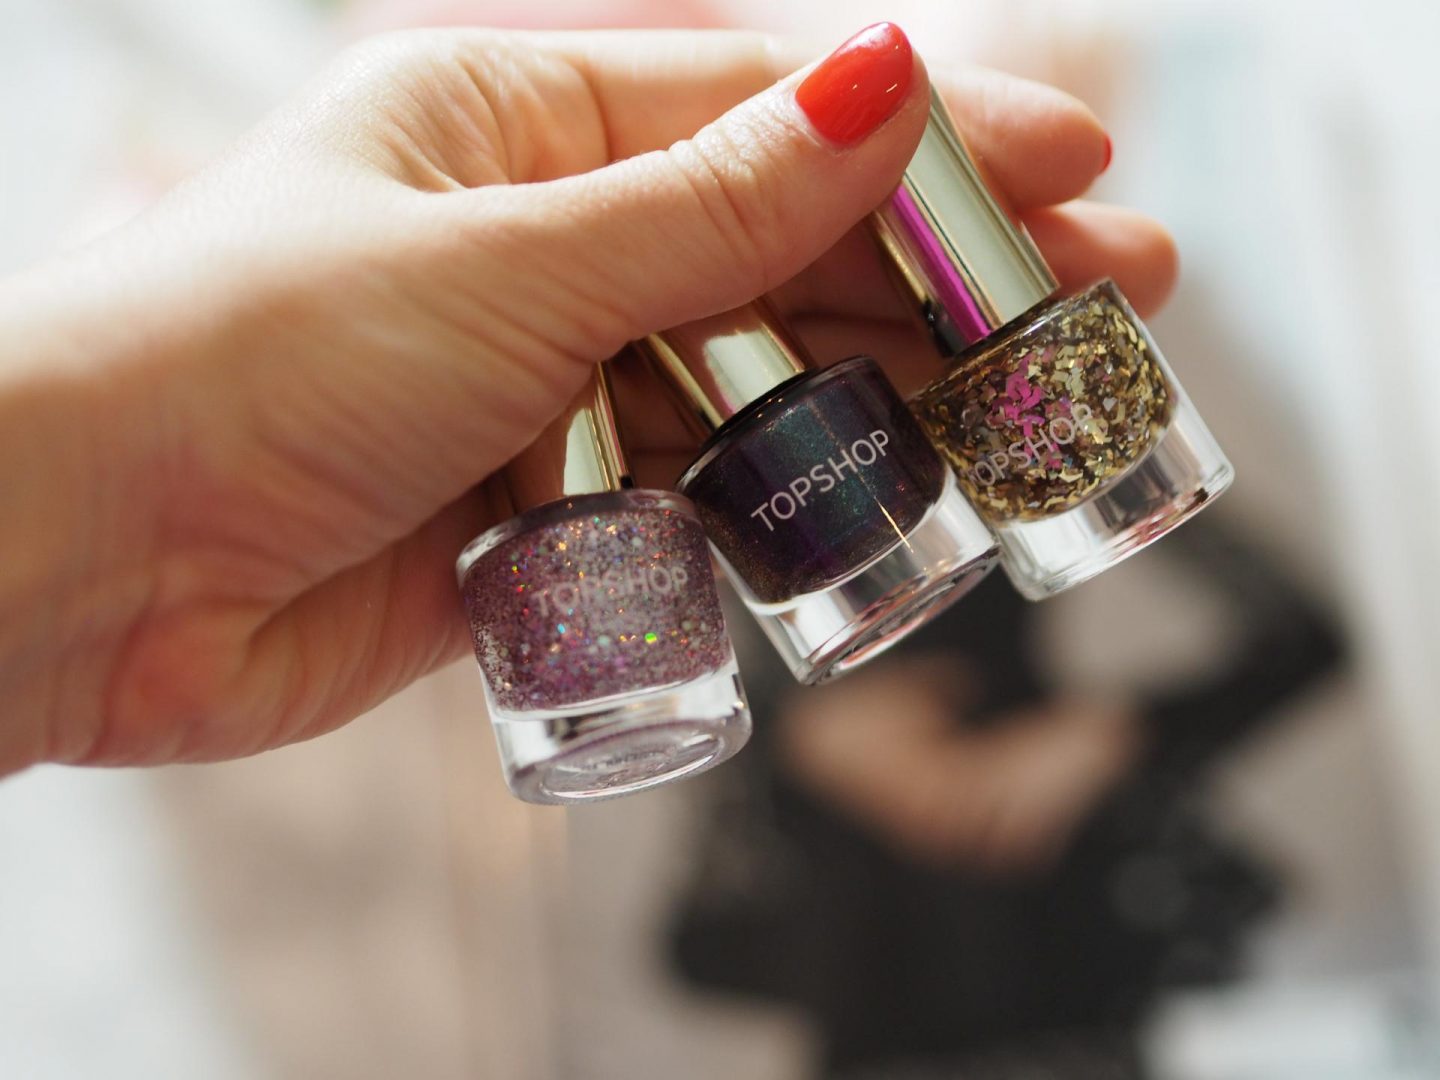 Topshop Beauty: The Limited Edition Holiday Collection